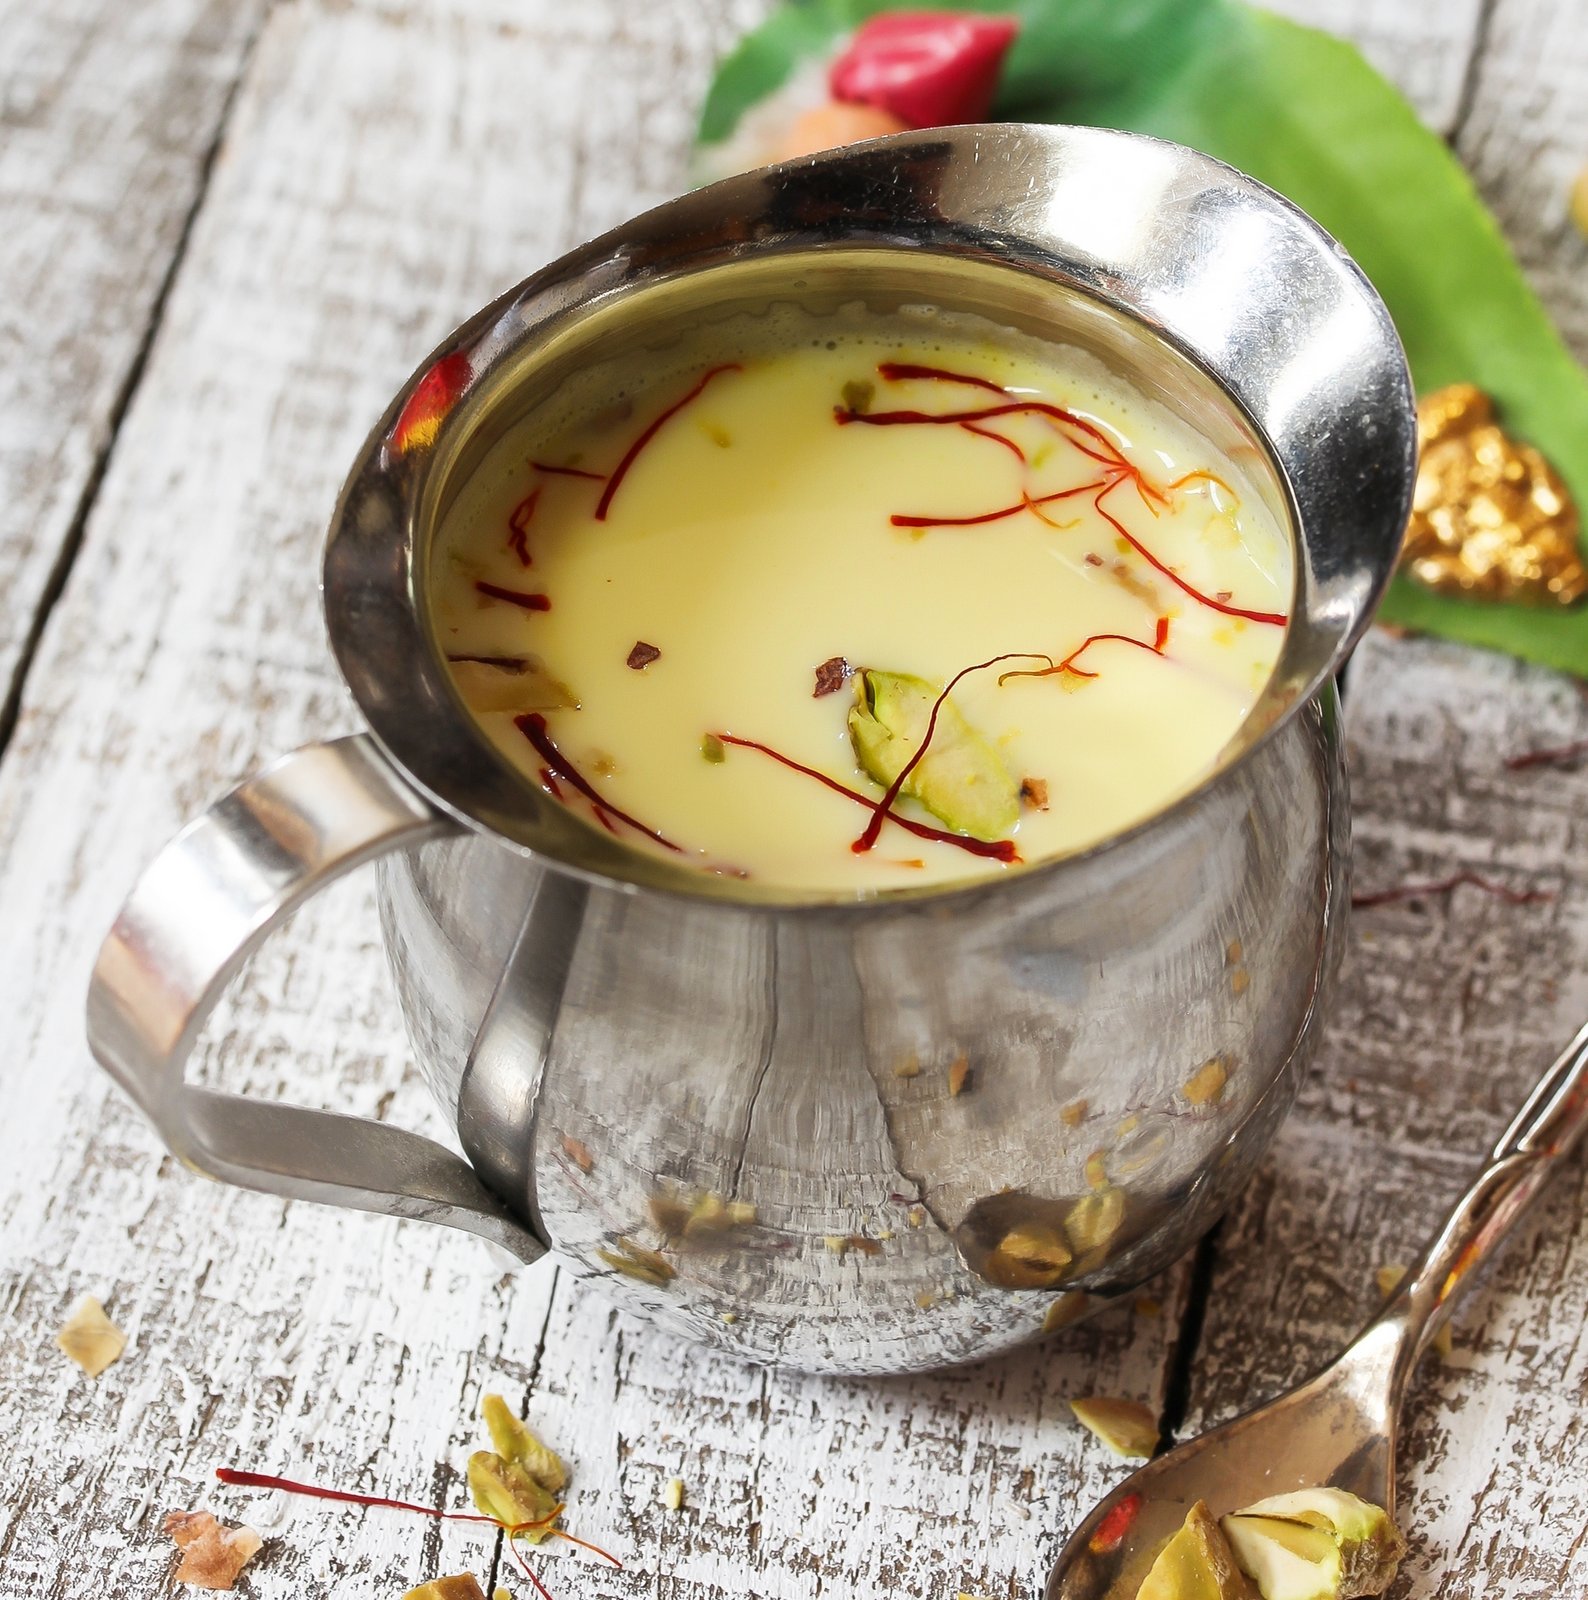 Thandai Recipe - Spiced Festival Drink With Saffron And Dry Fruits